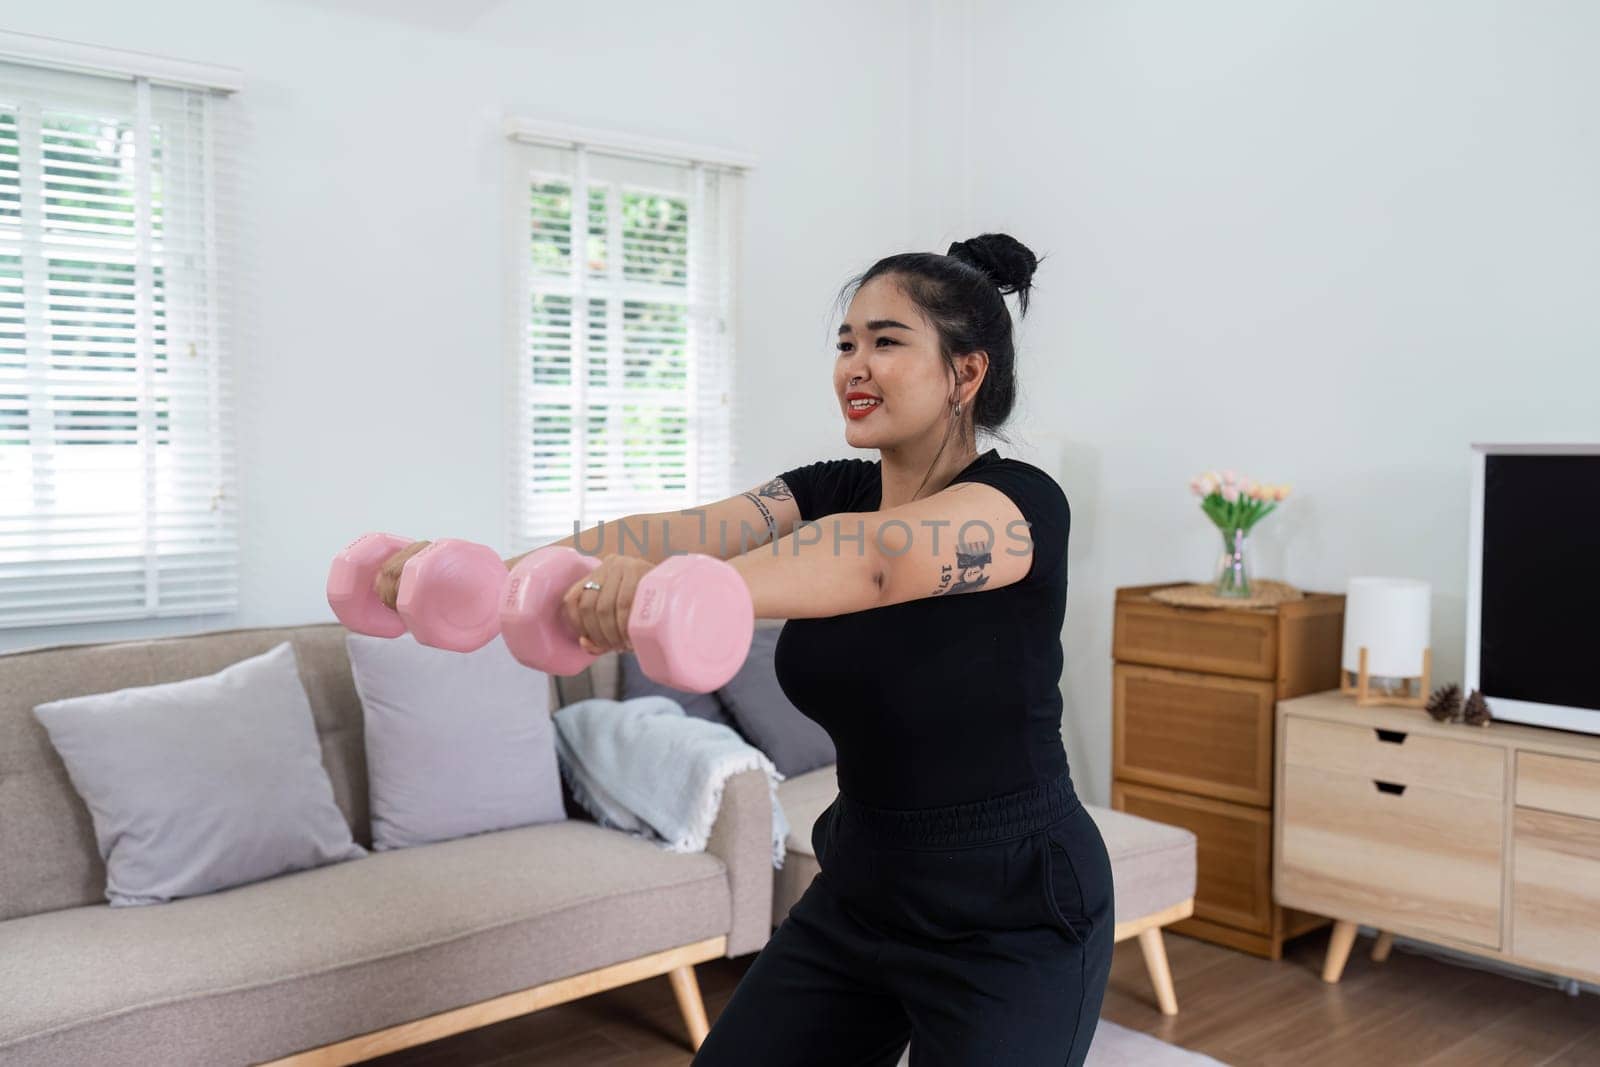 Cheerful attractive young overweight woman in activewear choosing healthy lifestyle.